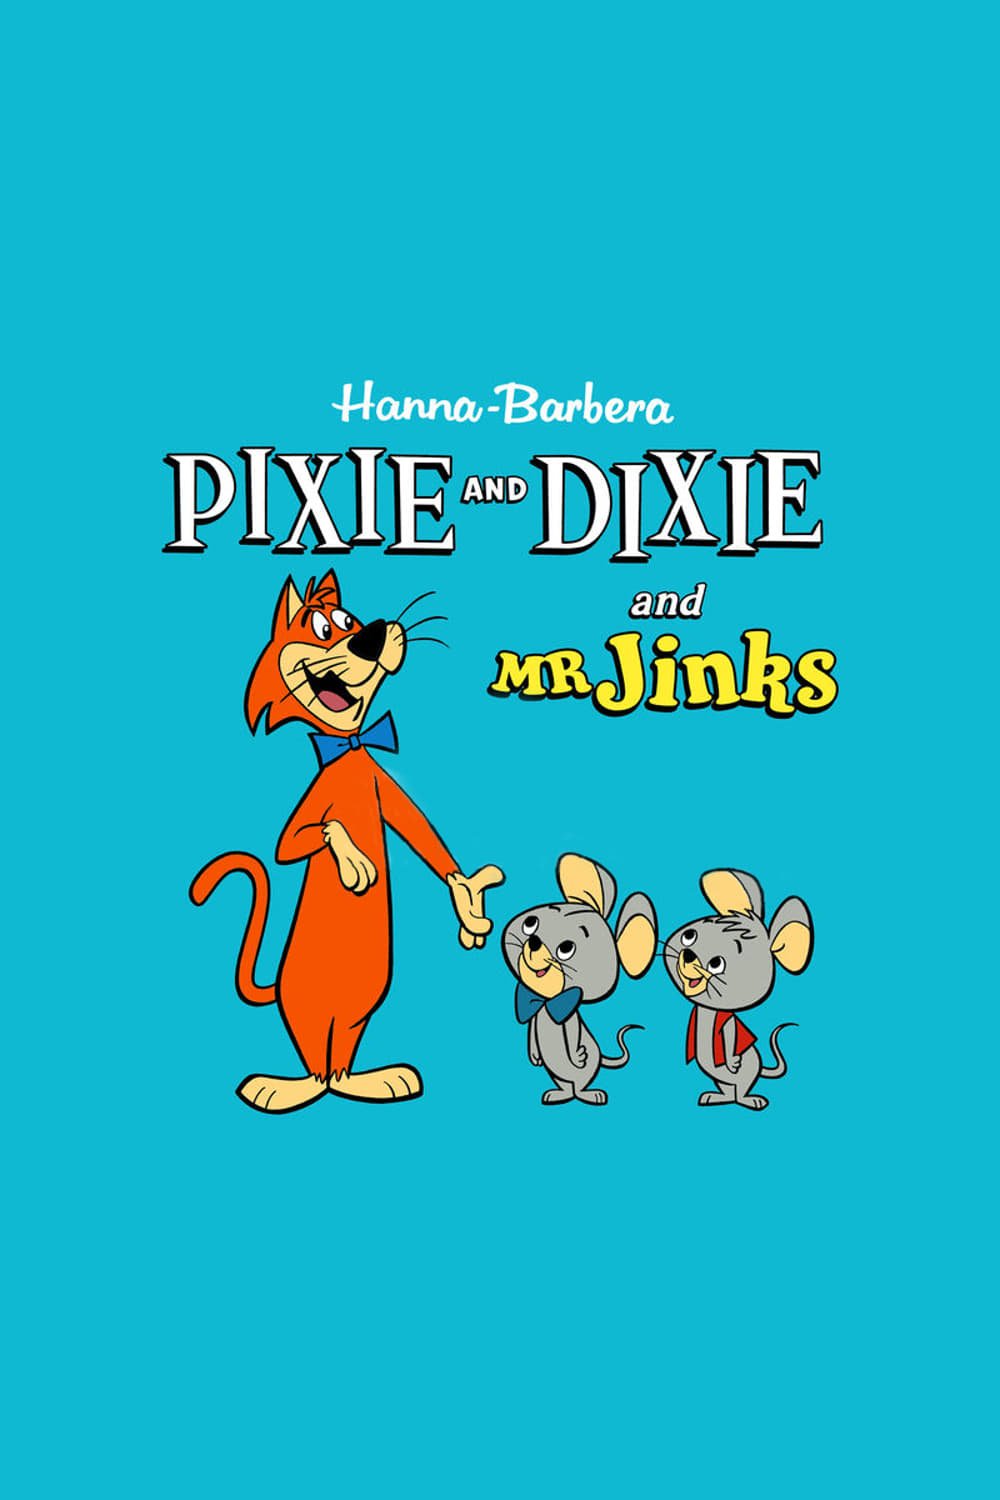 Pixie and Dixie and Mr. Jinks TV Show Poster